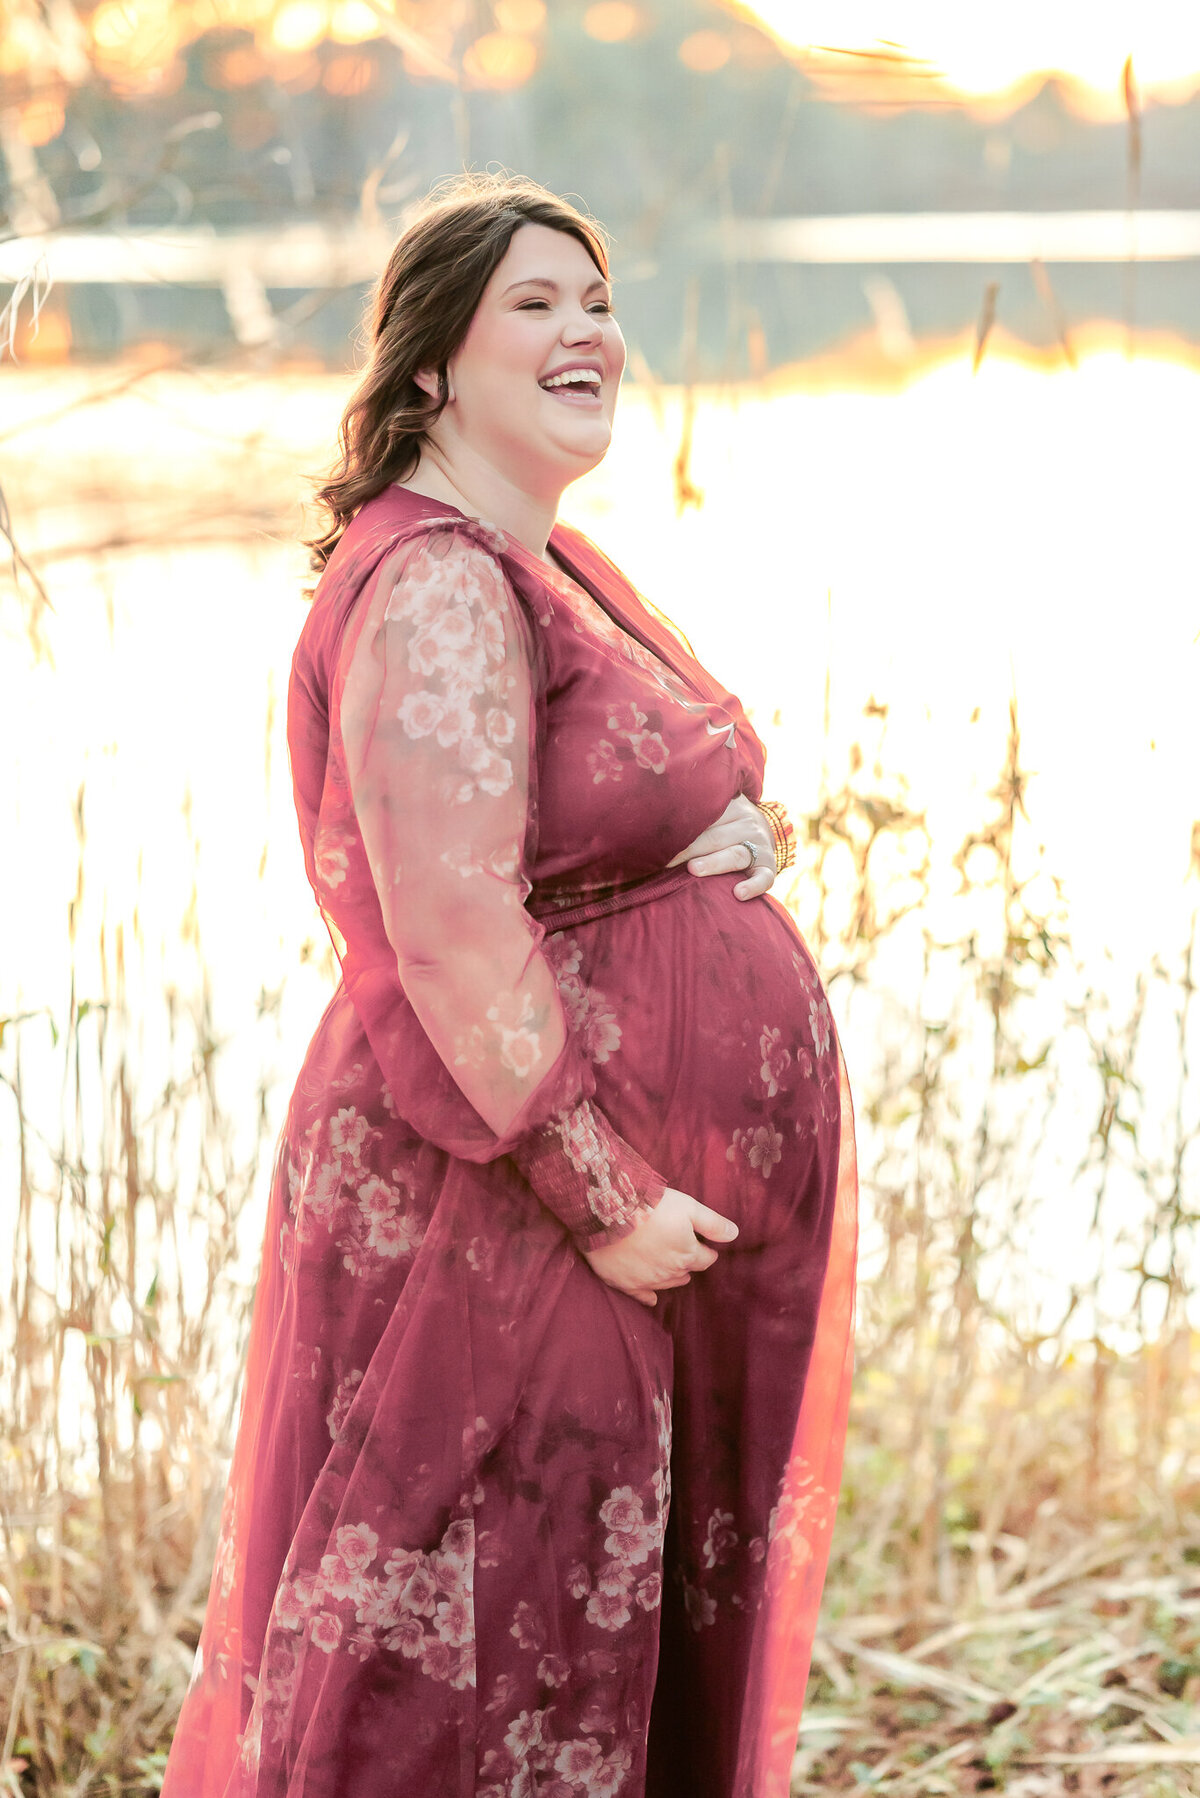 A mama-to-be, wearing a pink floral dress, holds her belly and laughs at the antics of her family.